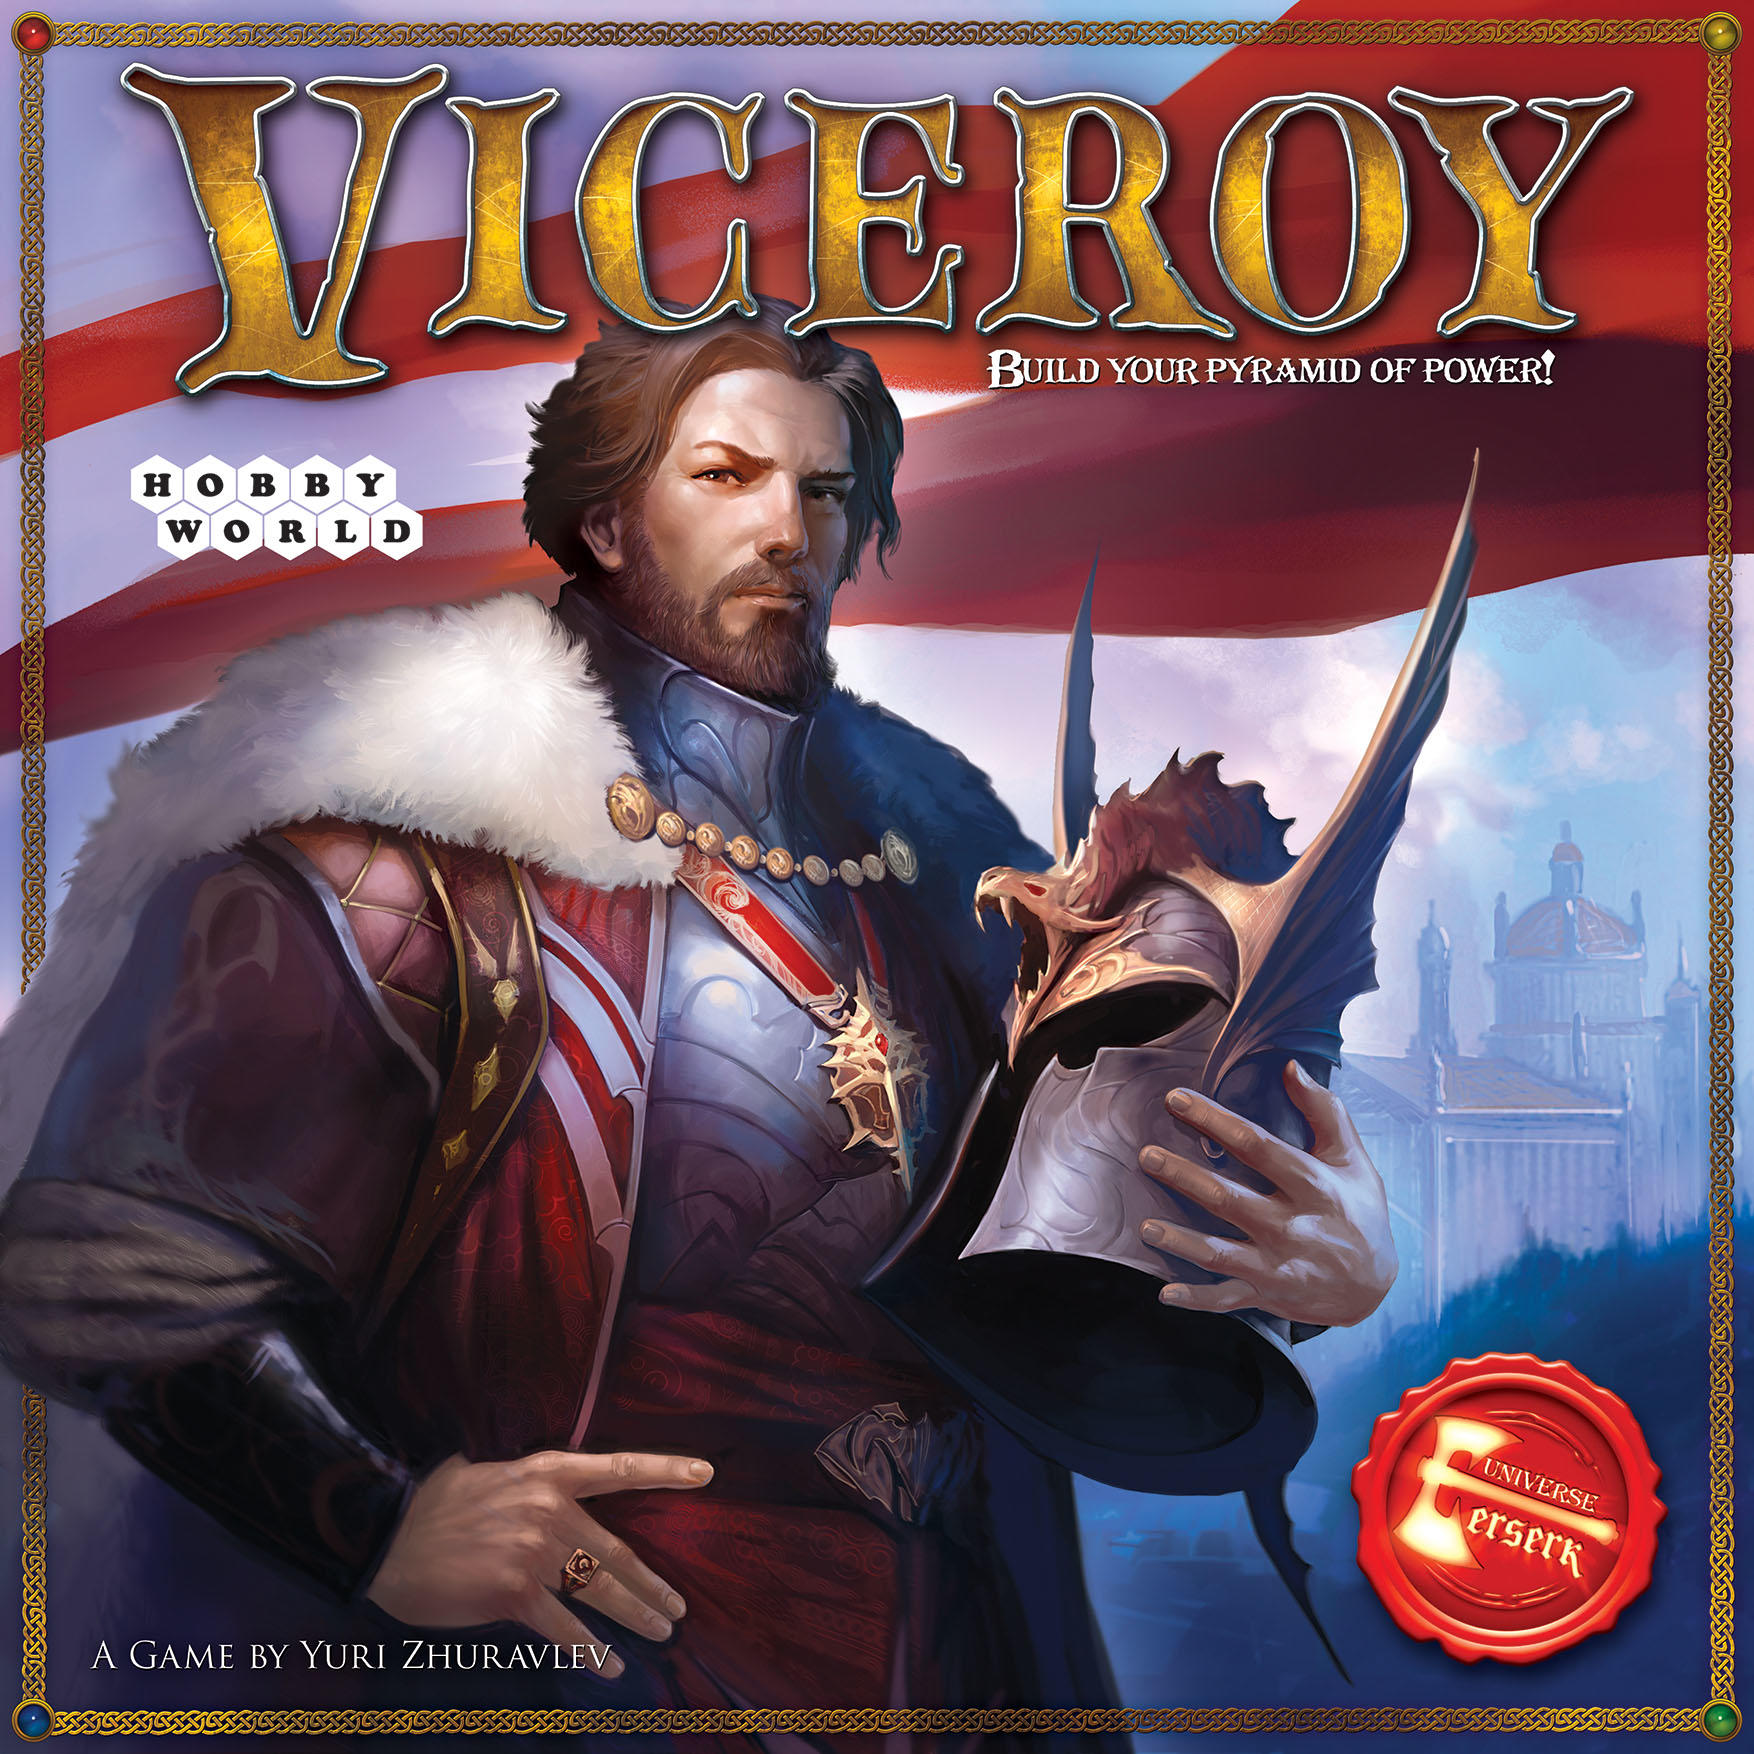 Viceroy Review Board Game Quest,Silver Dollar Value 1979